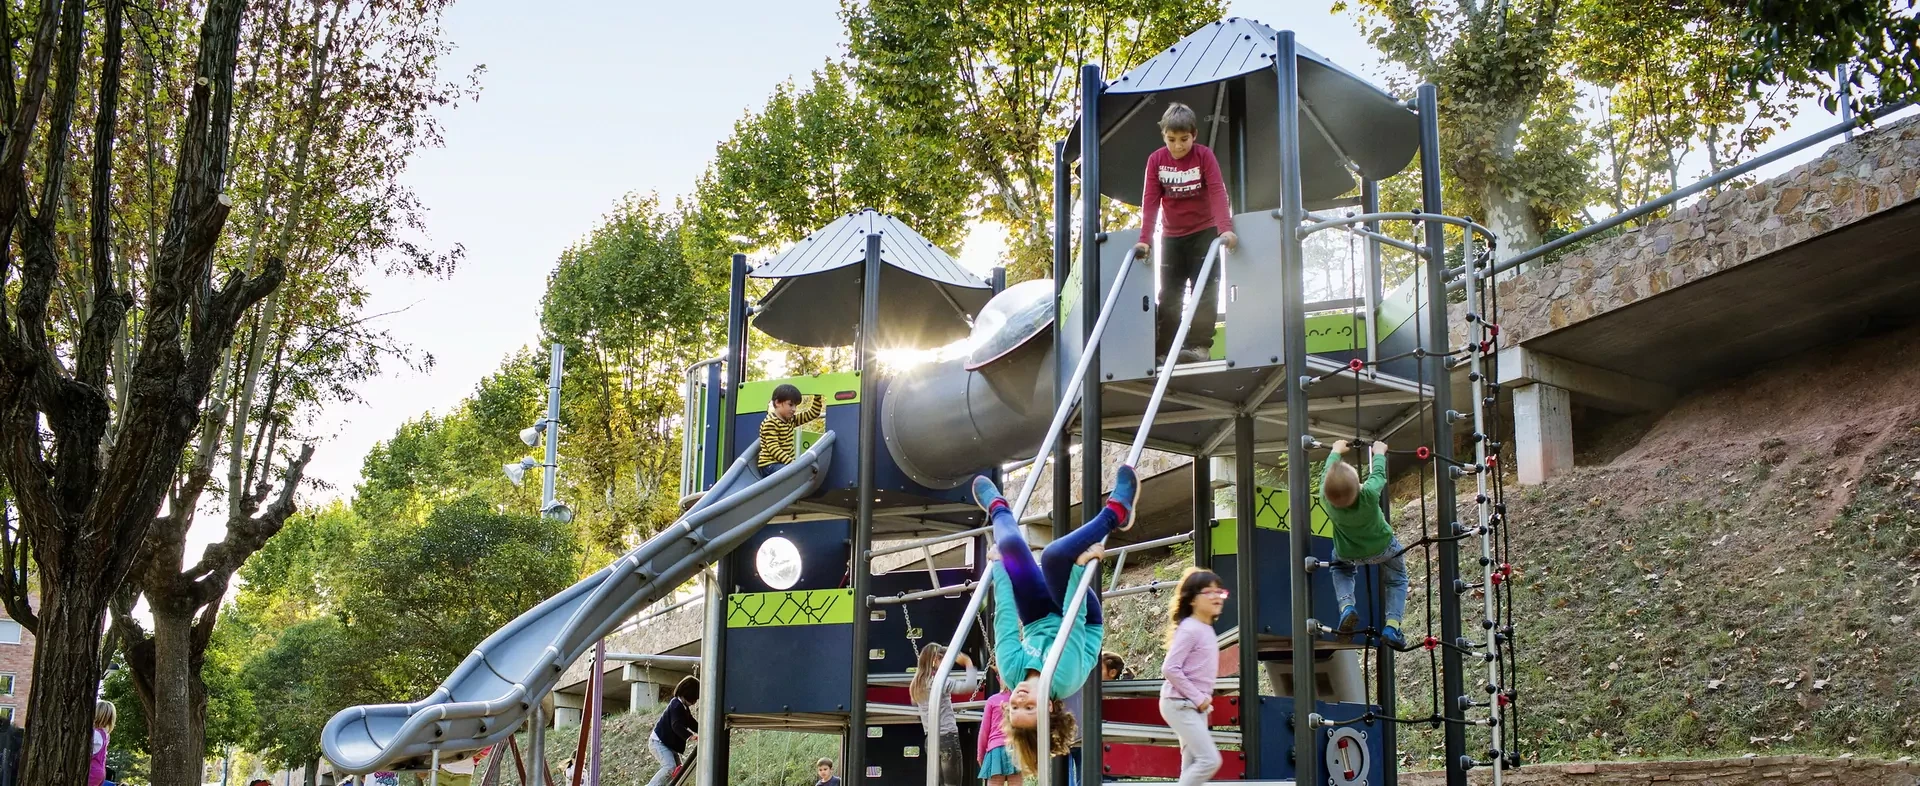 children having fun on a large play system for school-agers and tweens